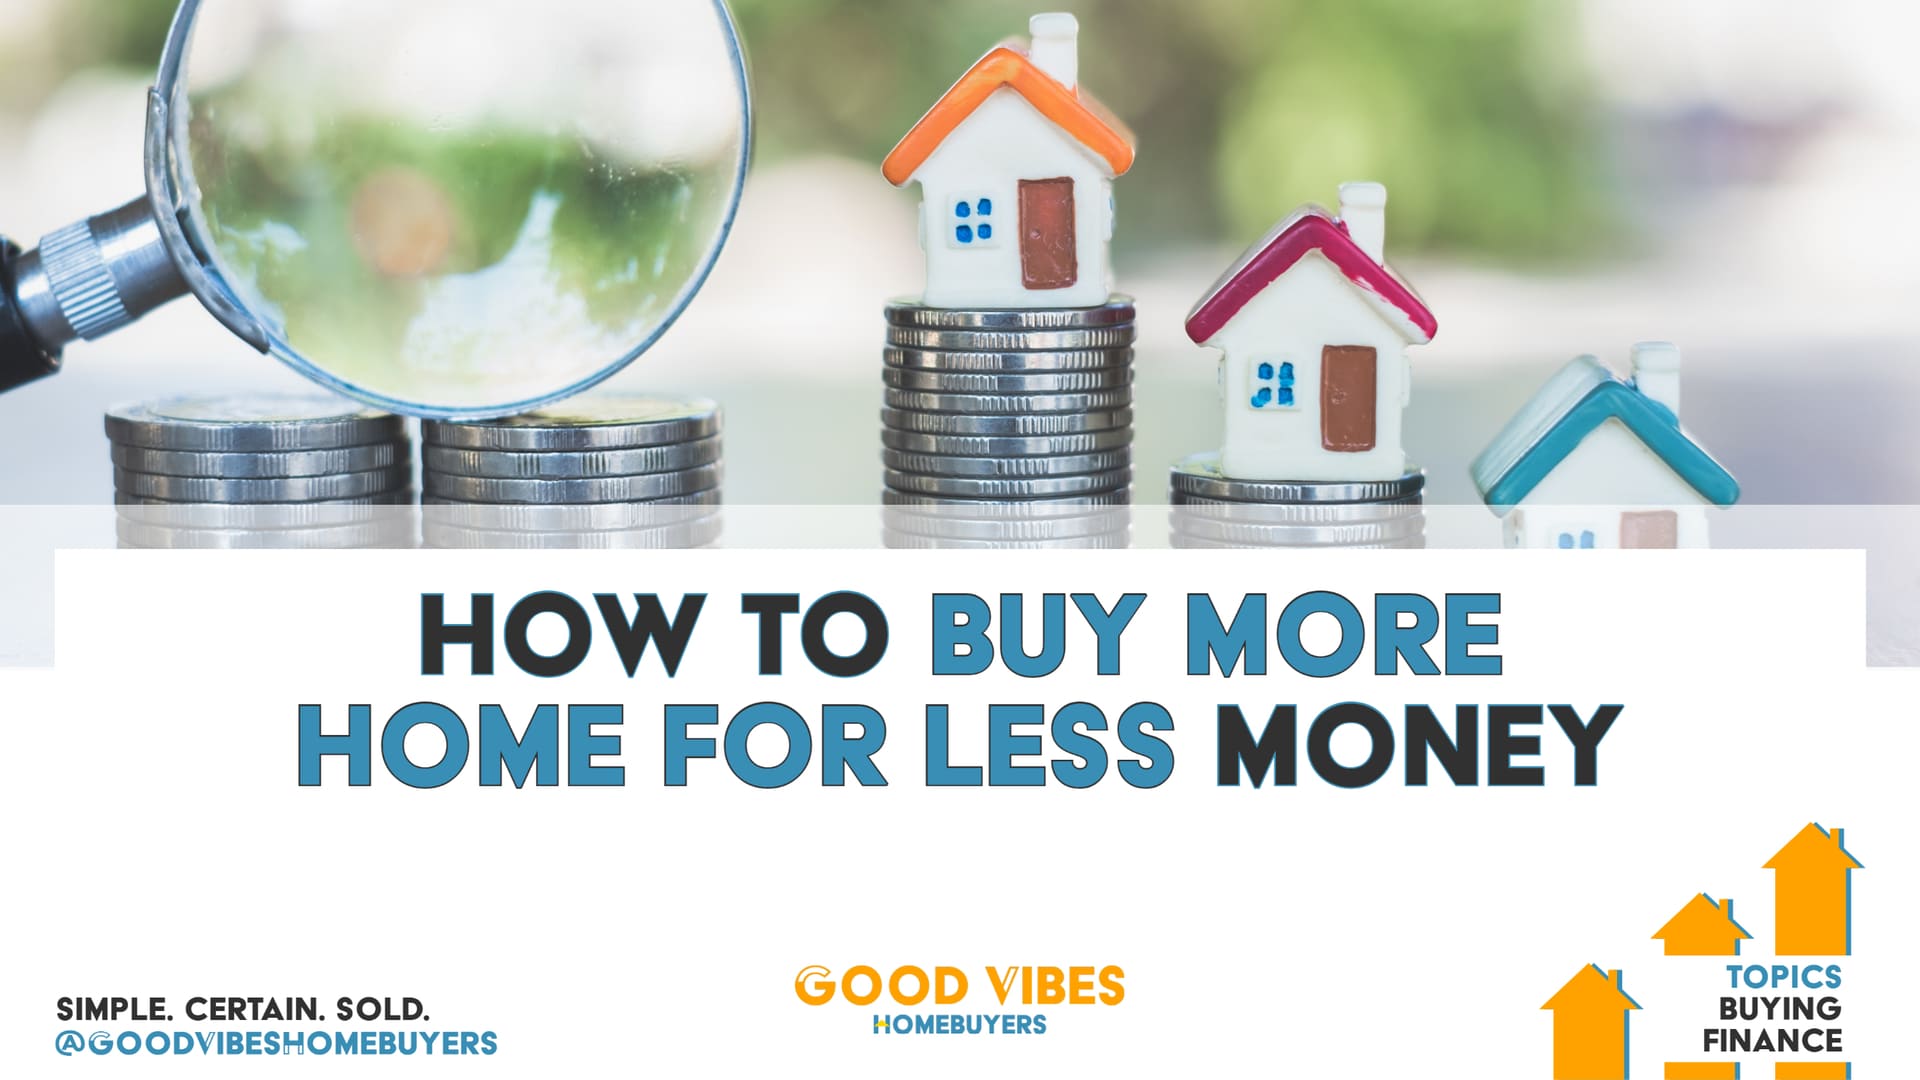 How to Buy More Home for Less Money